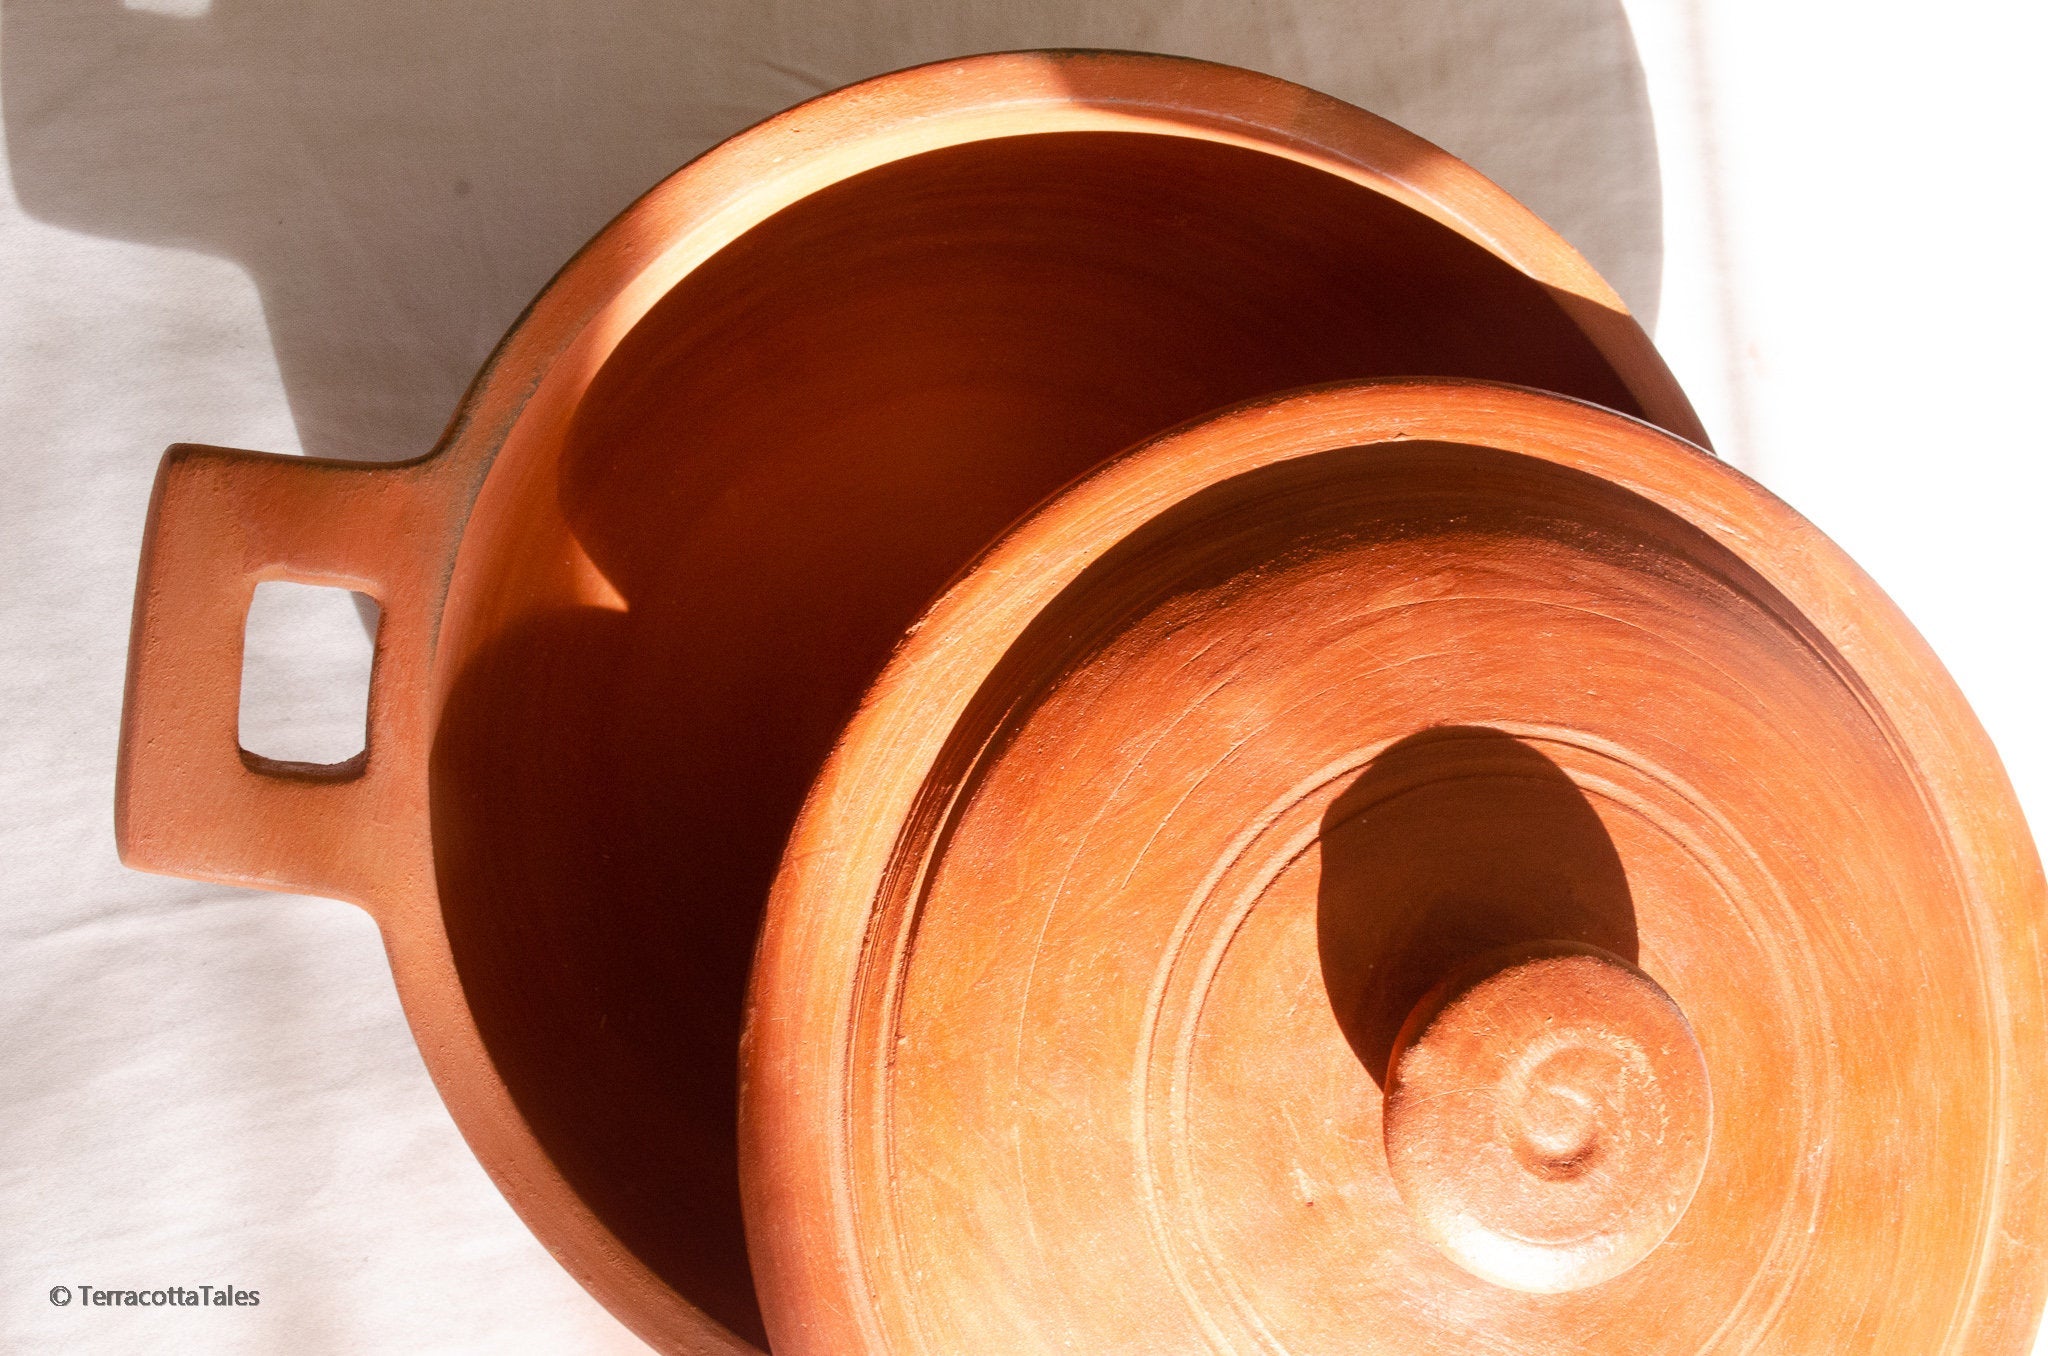 Handmade Clay Cooking Pot with lid — Little Known Makers